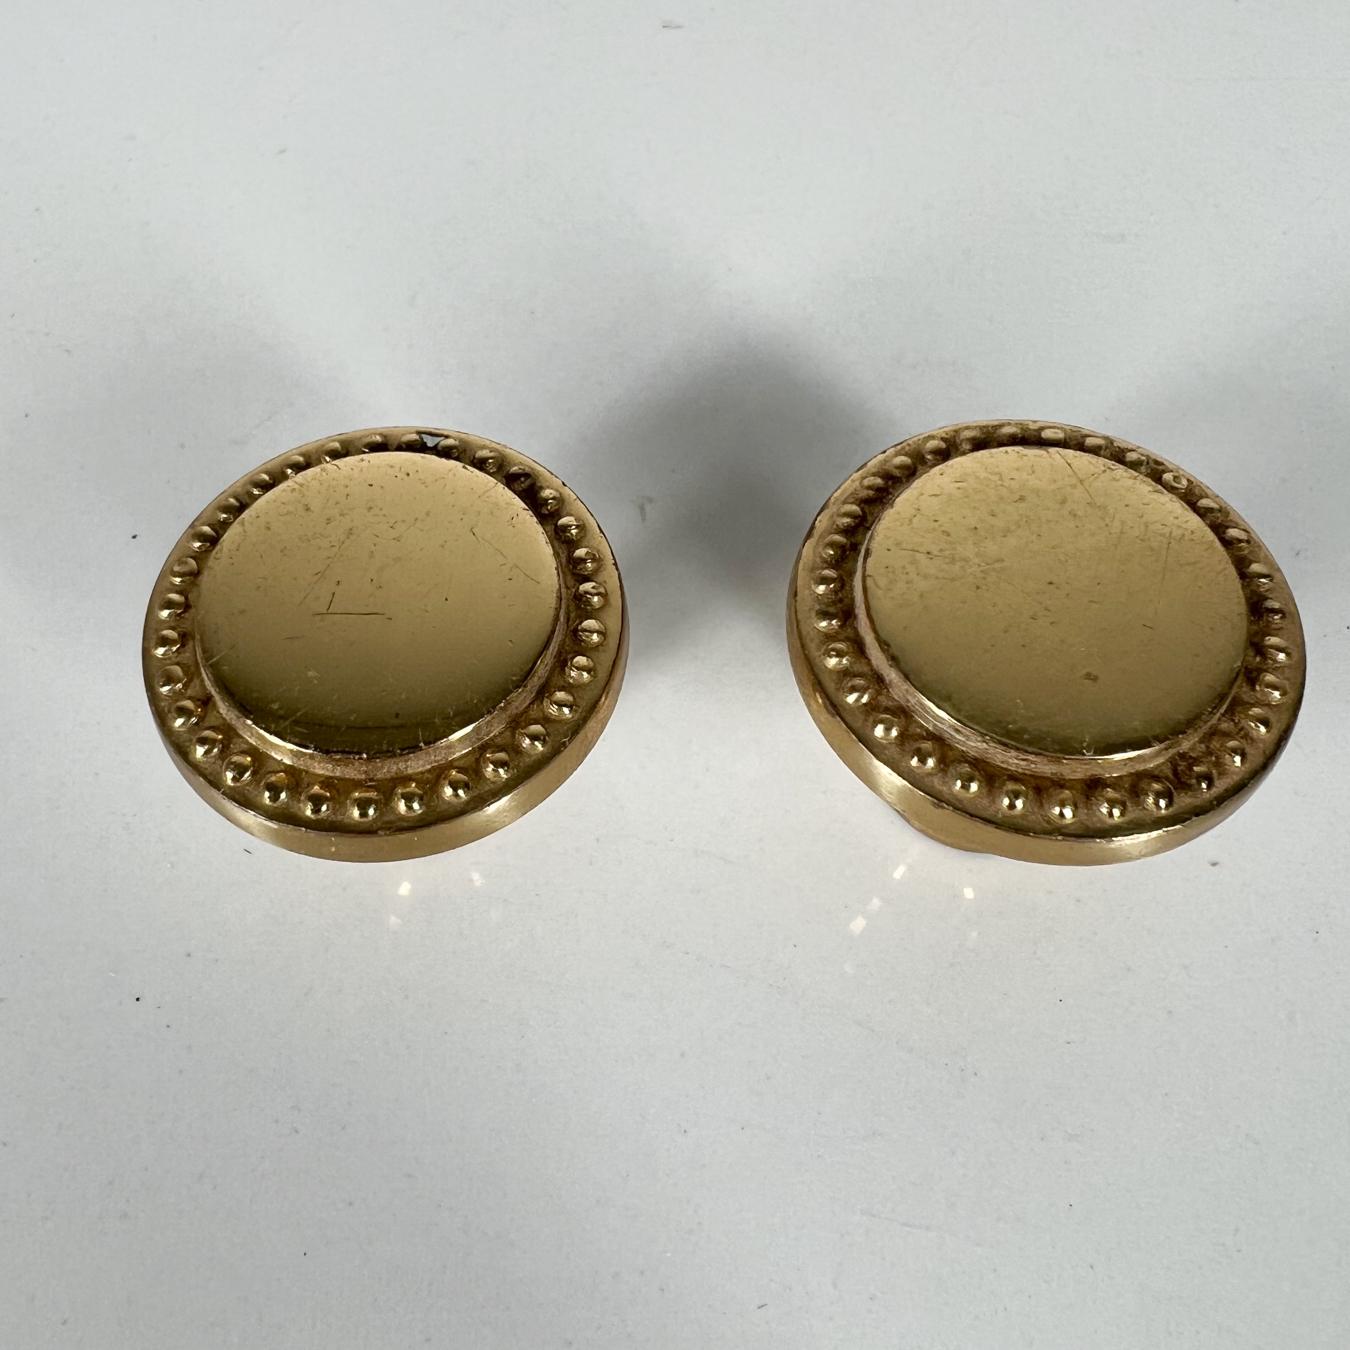 Art Deco Elegant Brass Round Drawer Pulls Set of 4
1.25 diameter x 1 tall
4 total
Preowned vintage condition.
See images provided please.
 